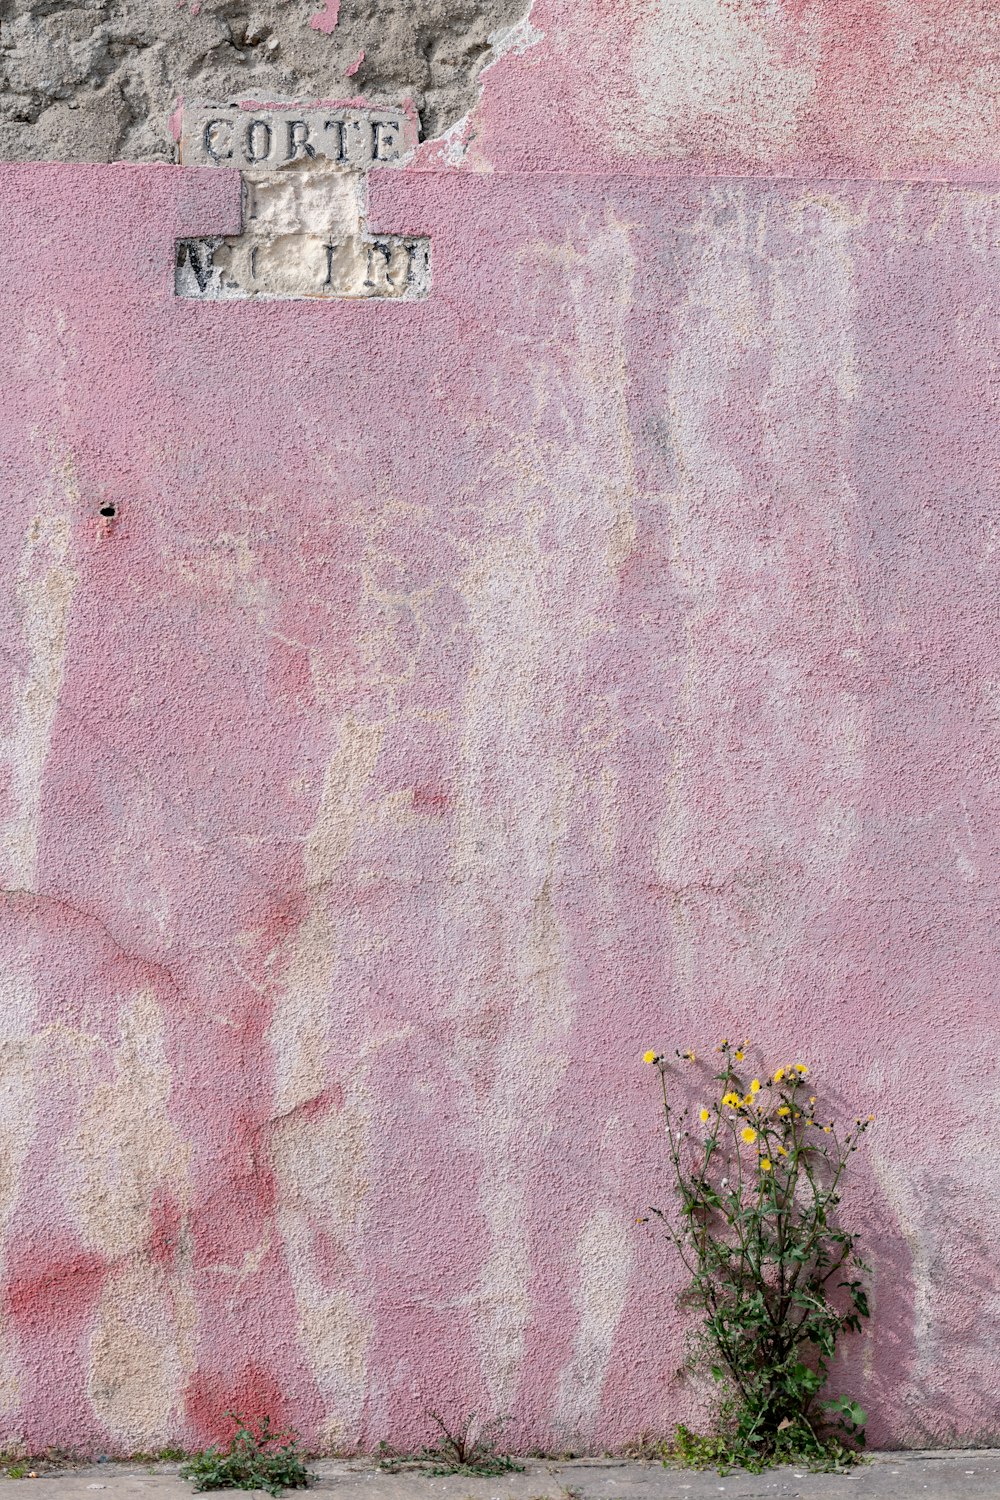 a pink wall with a street sign on it